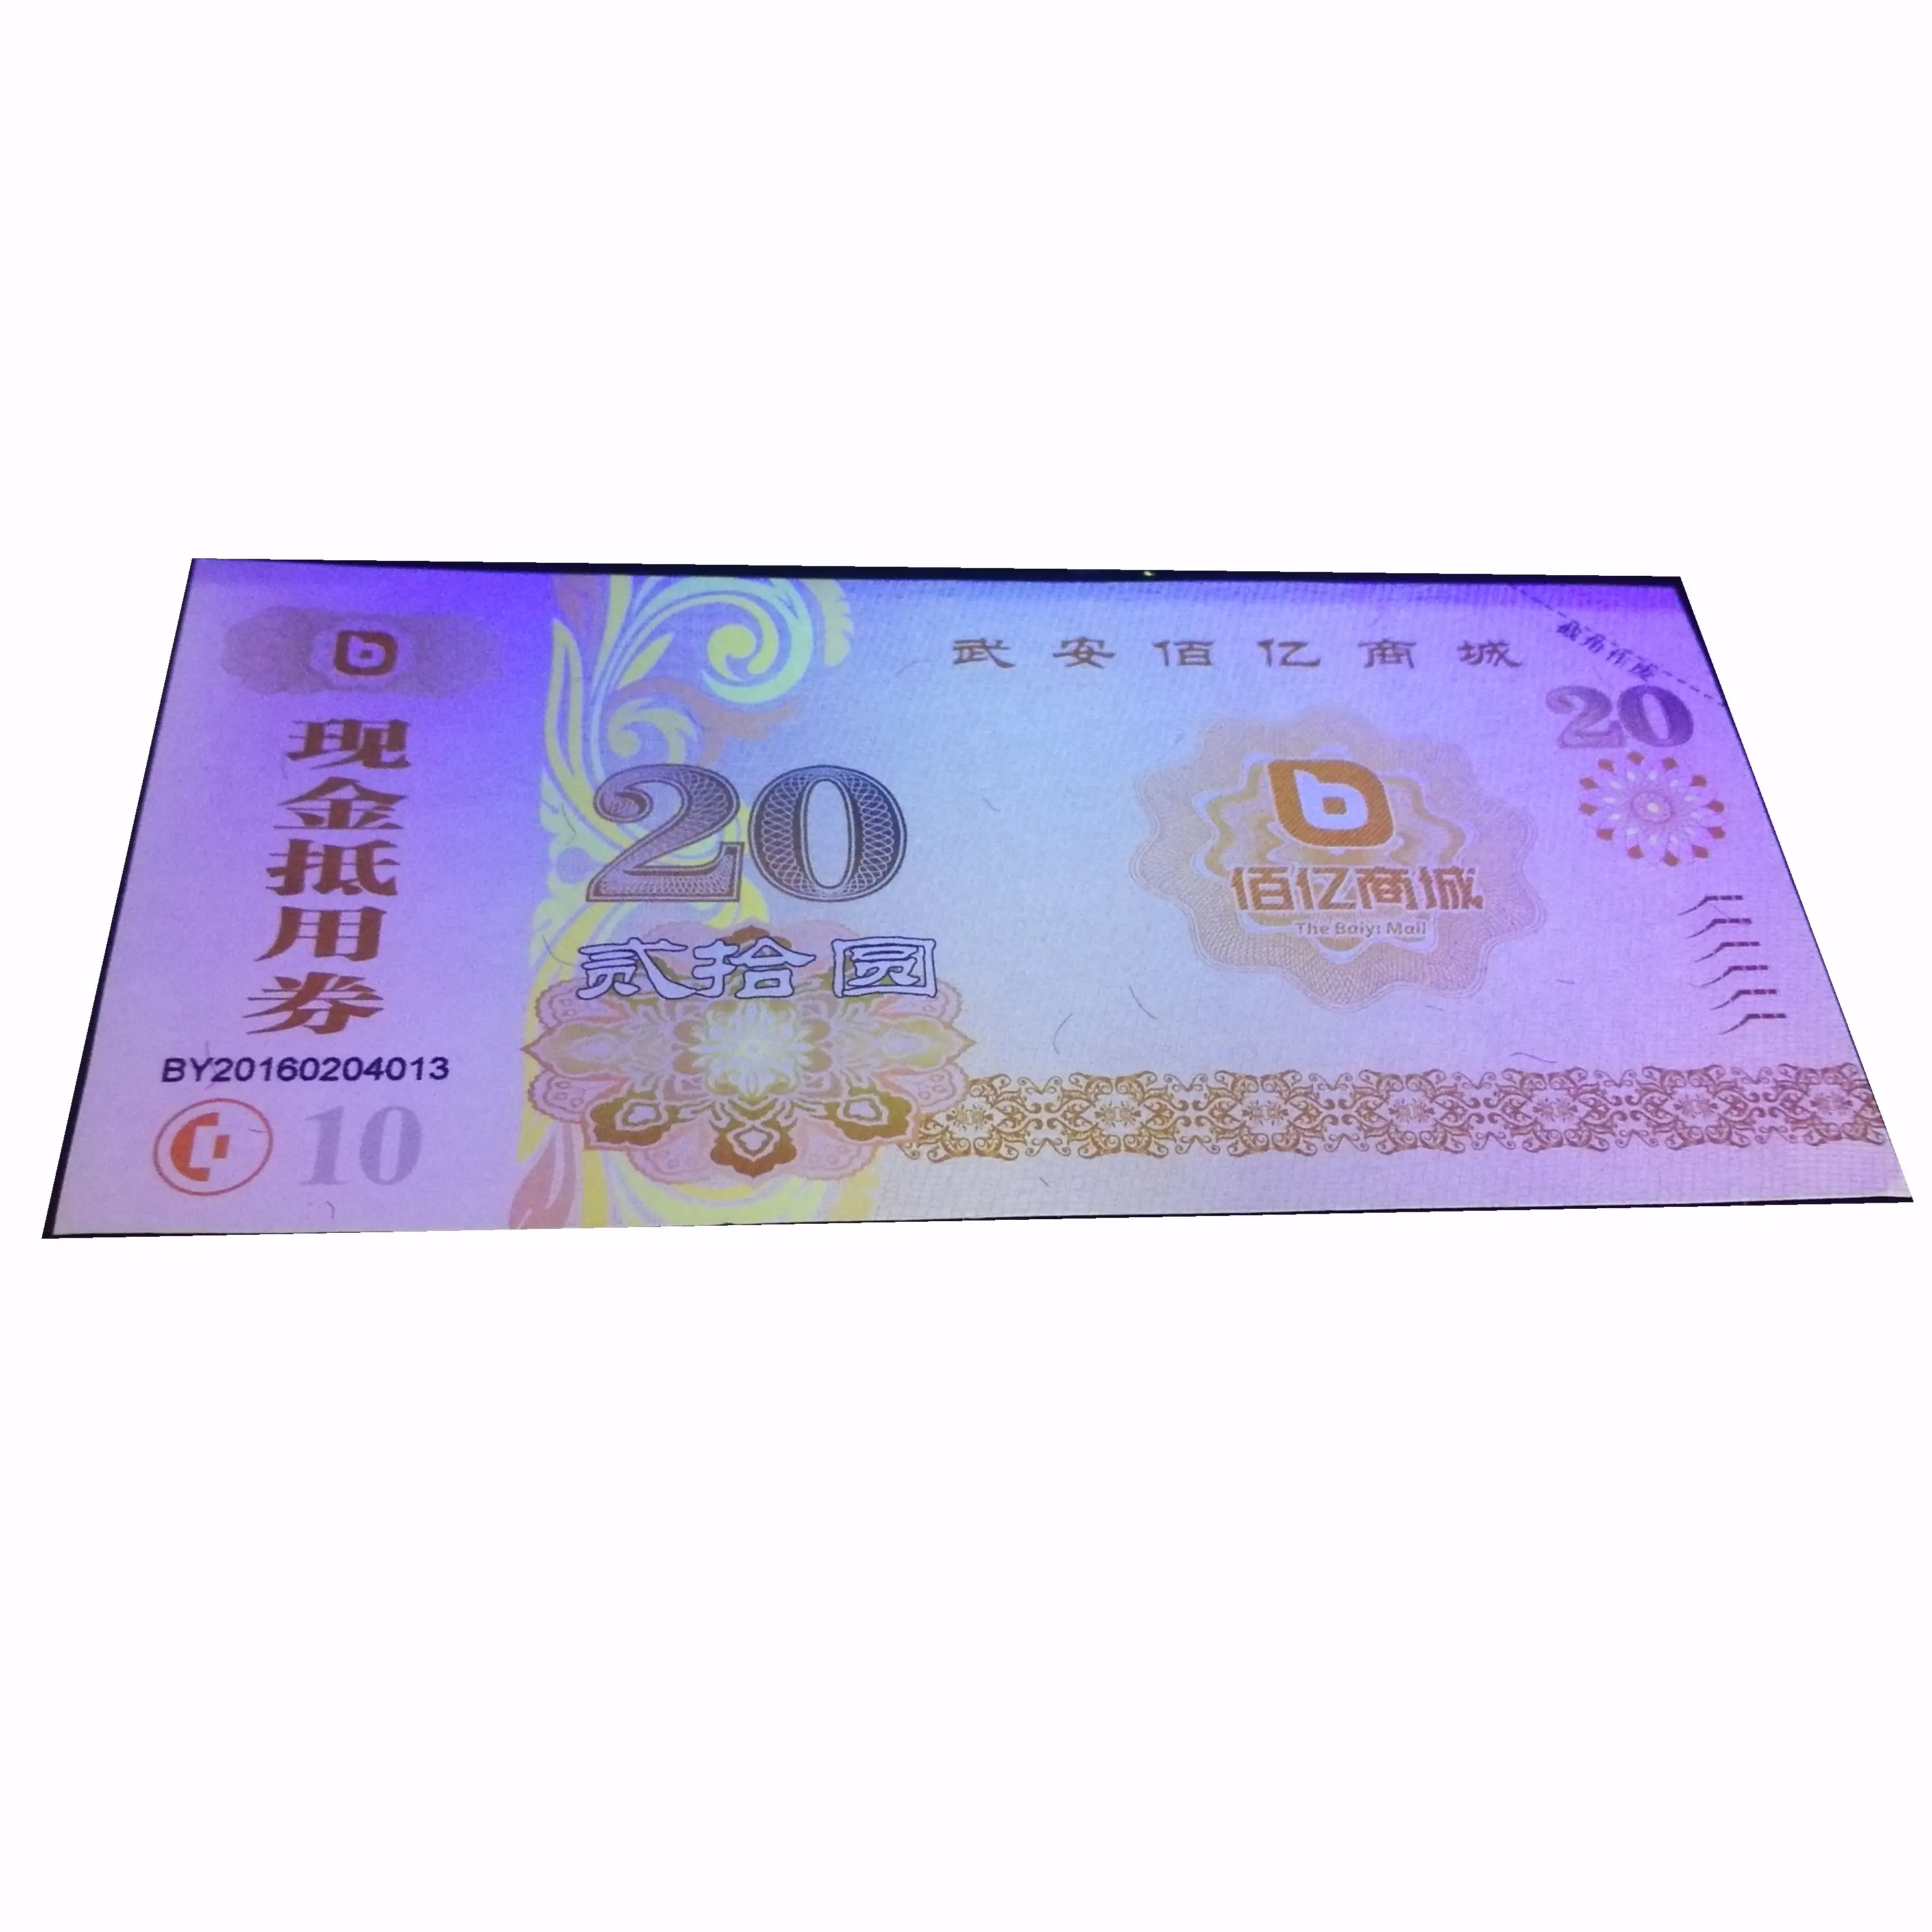 UV invisible printing security paper discount gas coupon